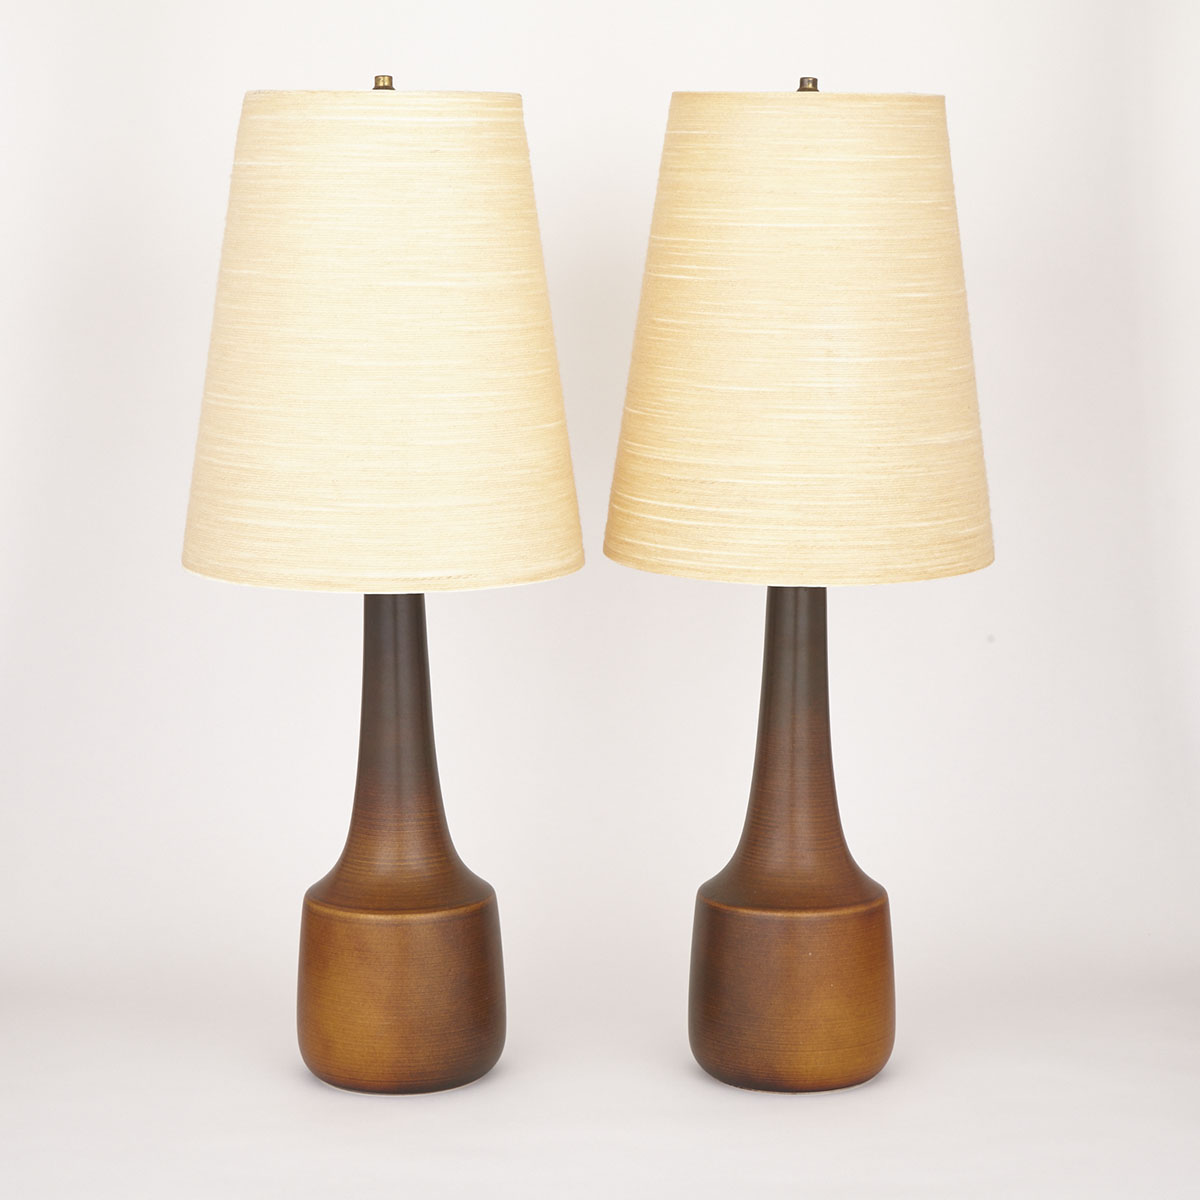 Pair of Lotte & Gunnar Bostlund  Ceramic Table Lamps with Original Wool Wrapped Fiberglass Shades, mid 20th century